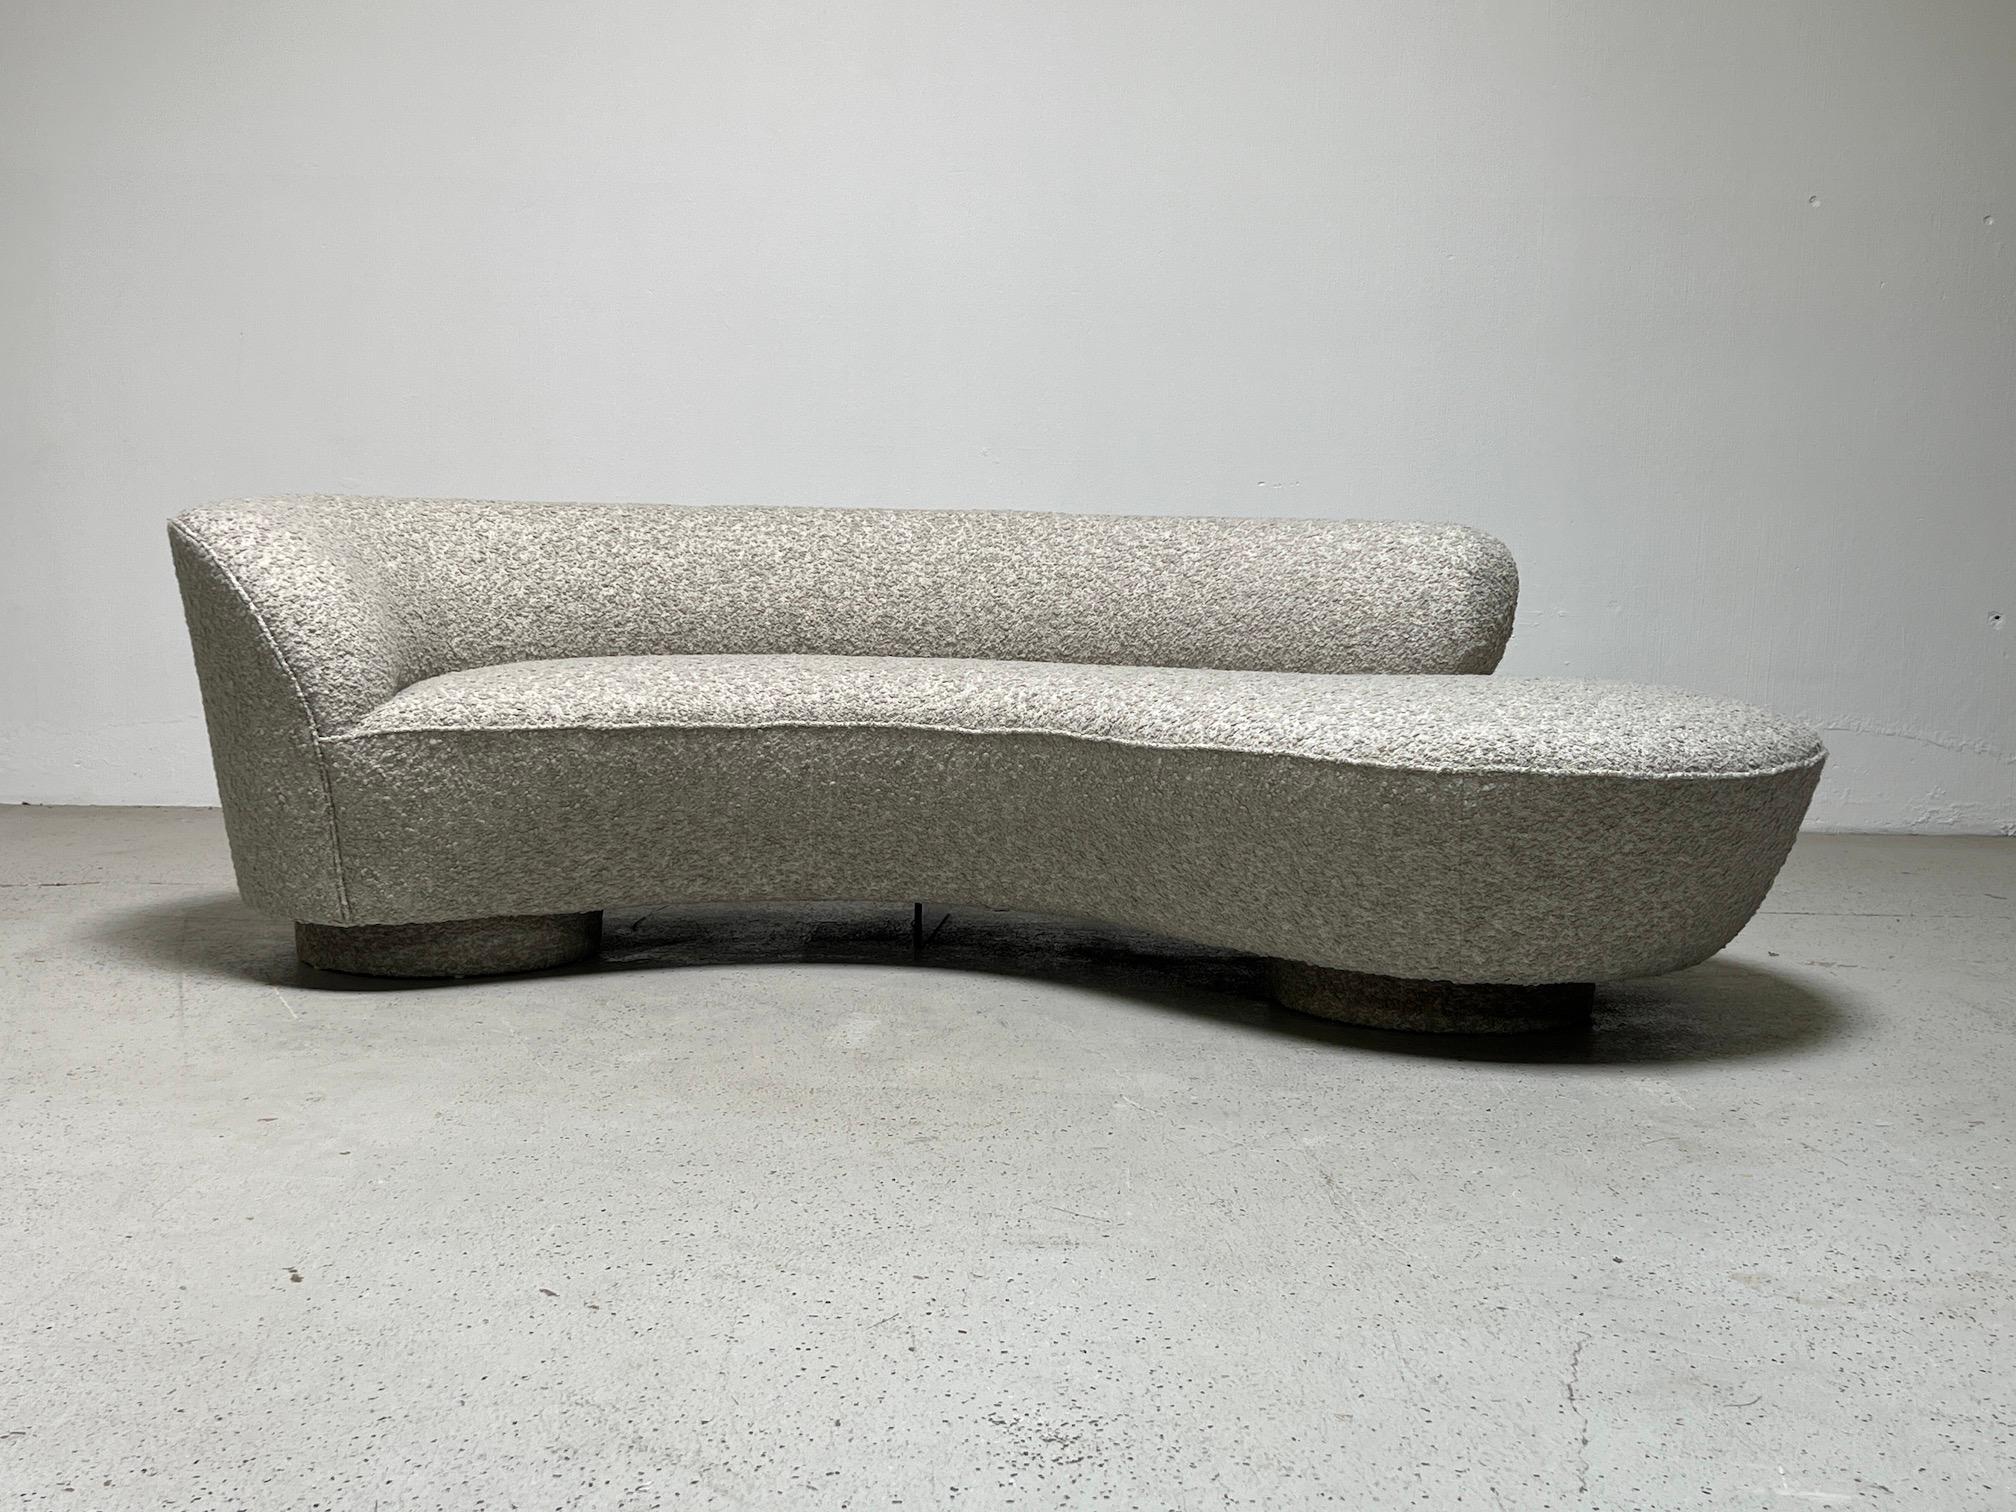 Pair of Sofas by Vladimir Kagan for Directional 1